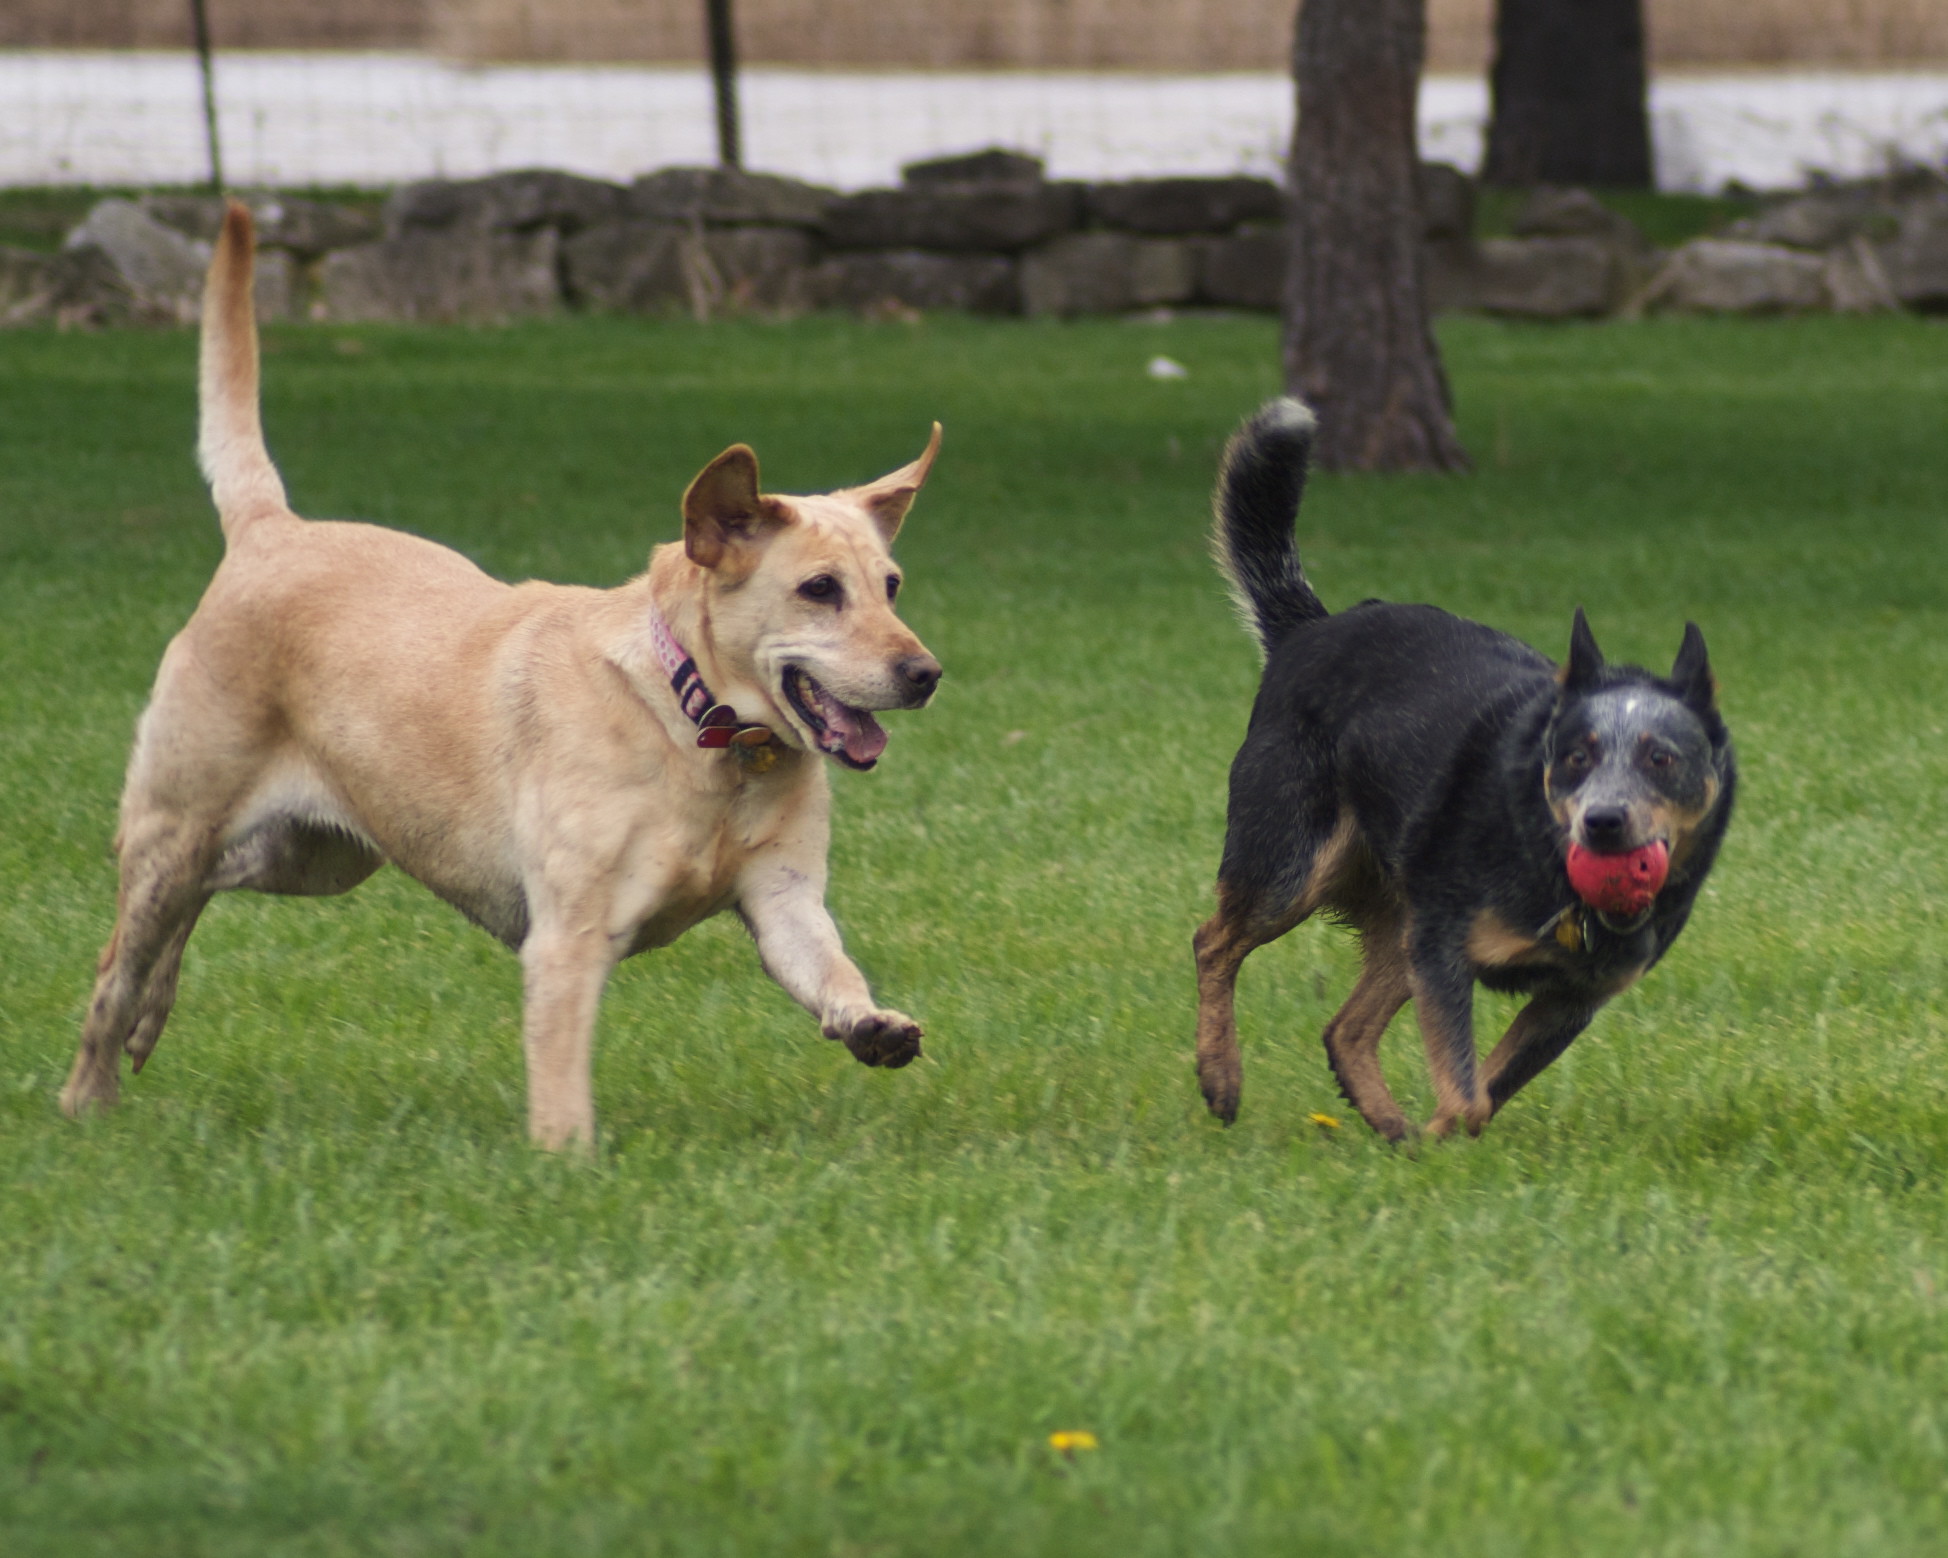 Two dogs, one cream coloured, and one dark, holding a ball in its mouth, are running on grass.